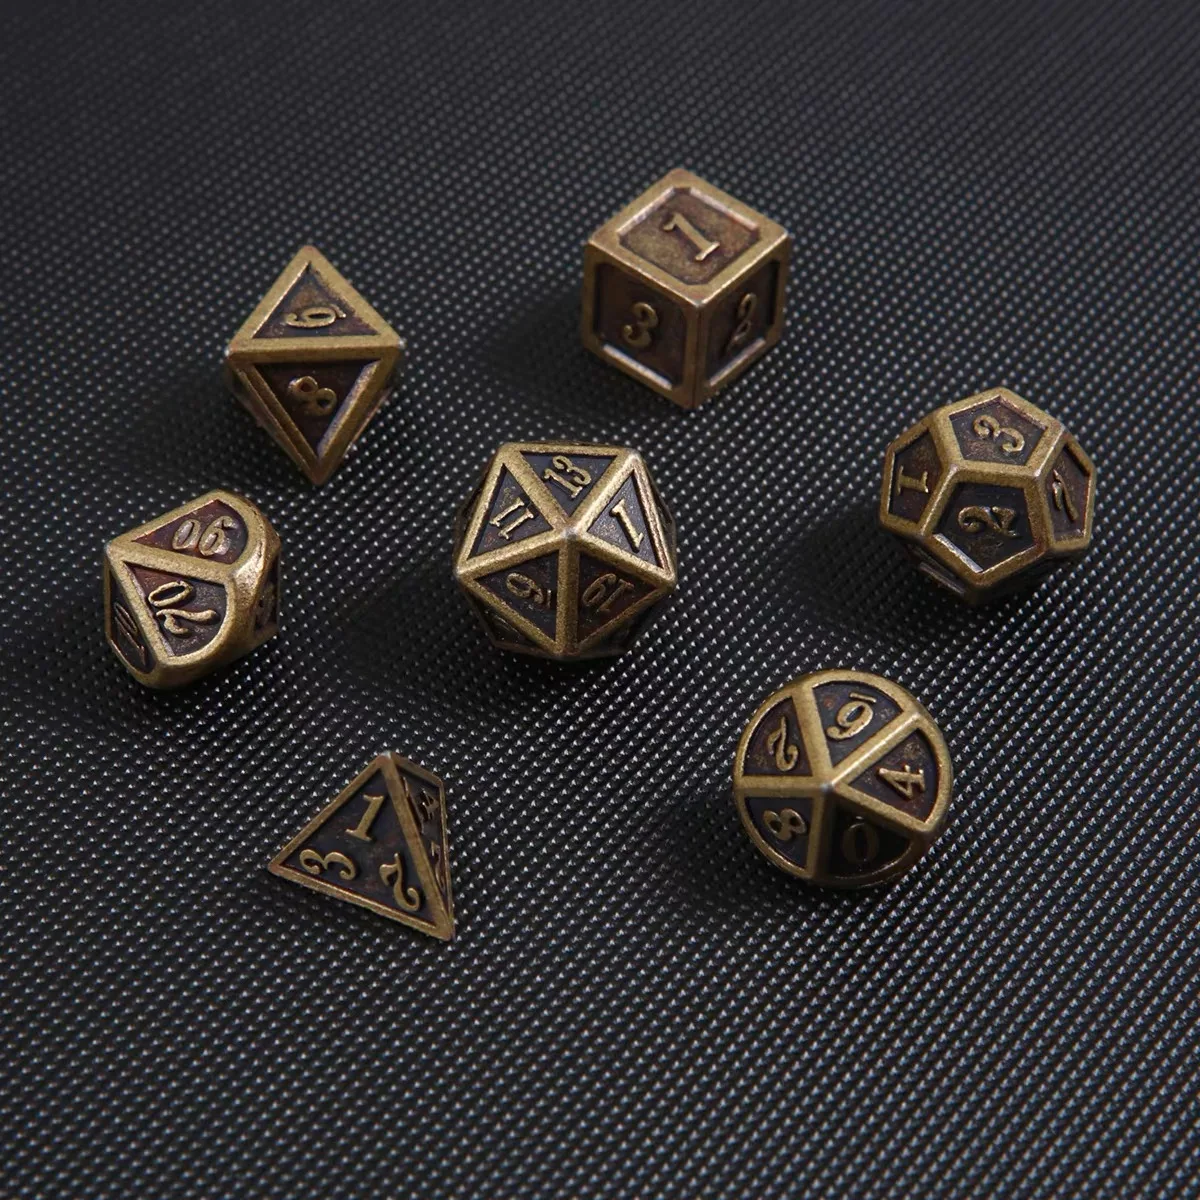 7PCS Metal Polyhedral Dice Bronze DND Game Dice for RPG Dungeons and Dragons DND RPG MTG D20 D12 D10 D8 D6 D4 Table Game